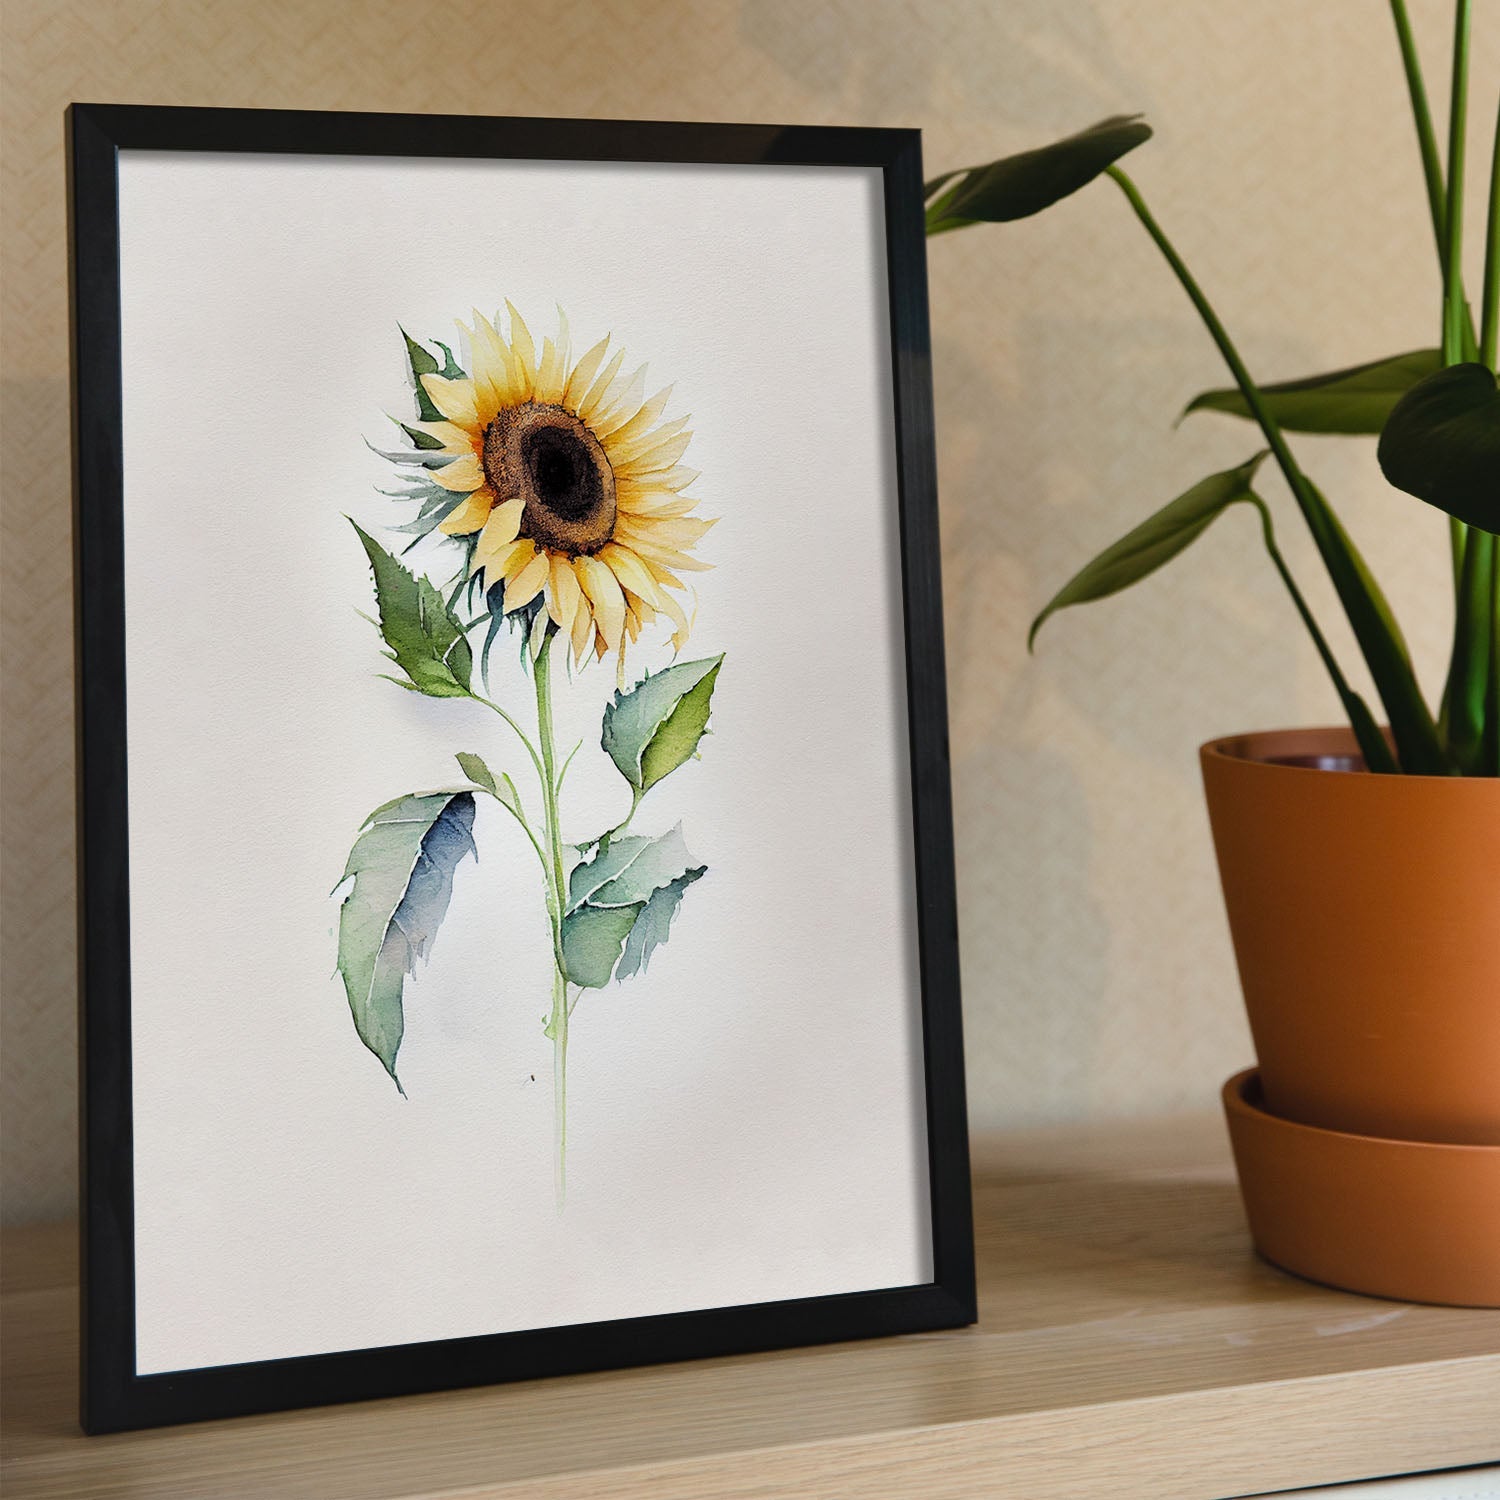 Nacnic watercolor minmal Sunflower_1. Aesthetic Wall Art Prints for Bedroom or Living Room Design.-Artwork-Nacnic-A4-Sin Marco-Nacnic Estudio SL